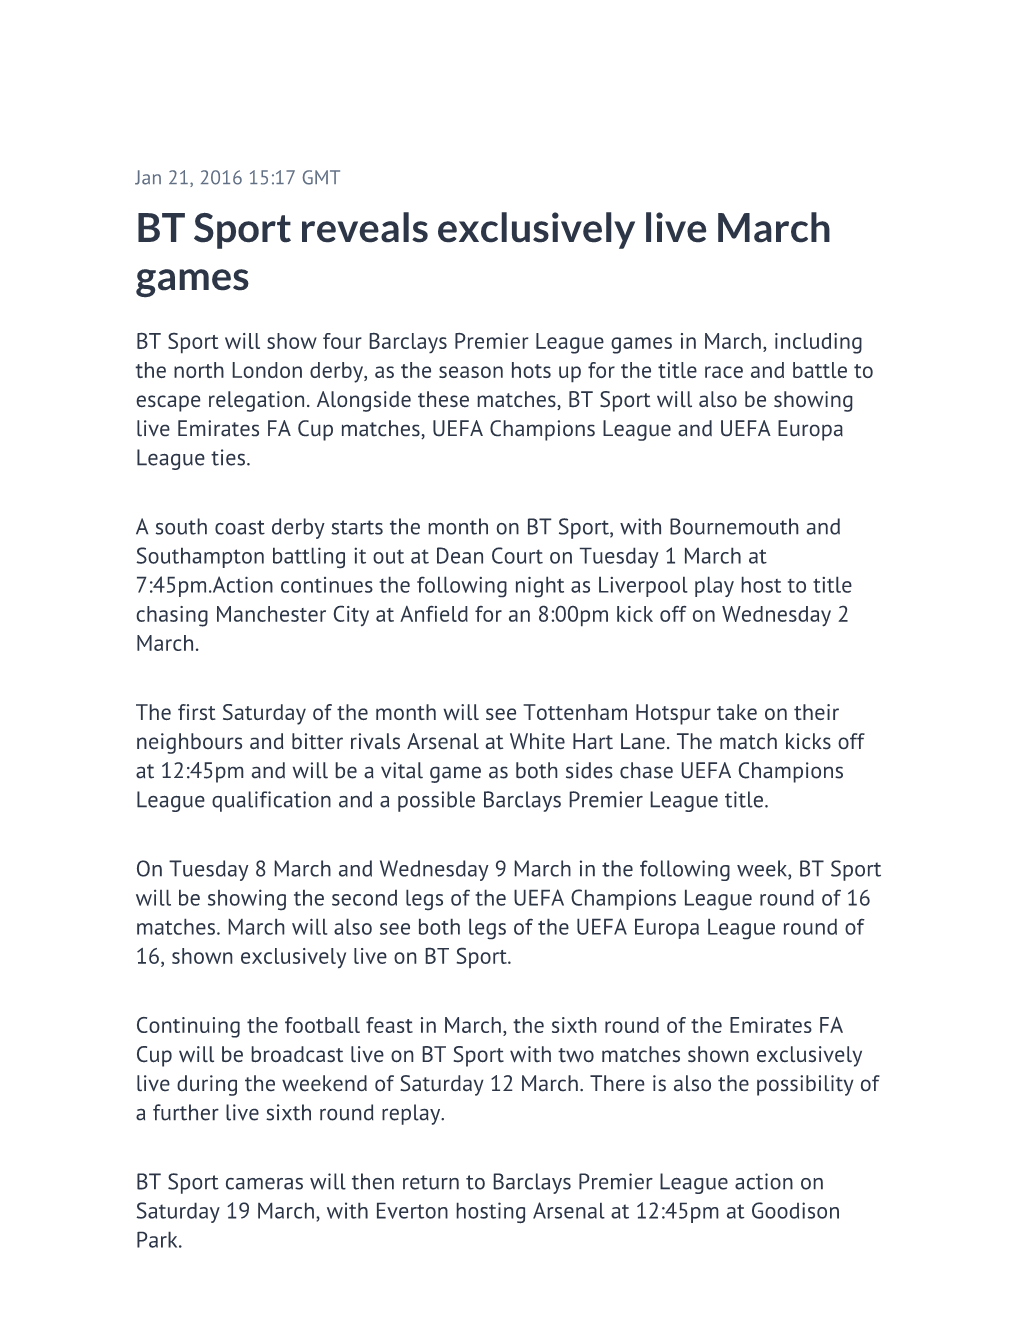 BT Sport Reveals Exclusively Live March Games